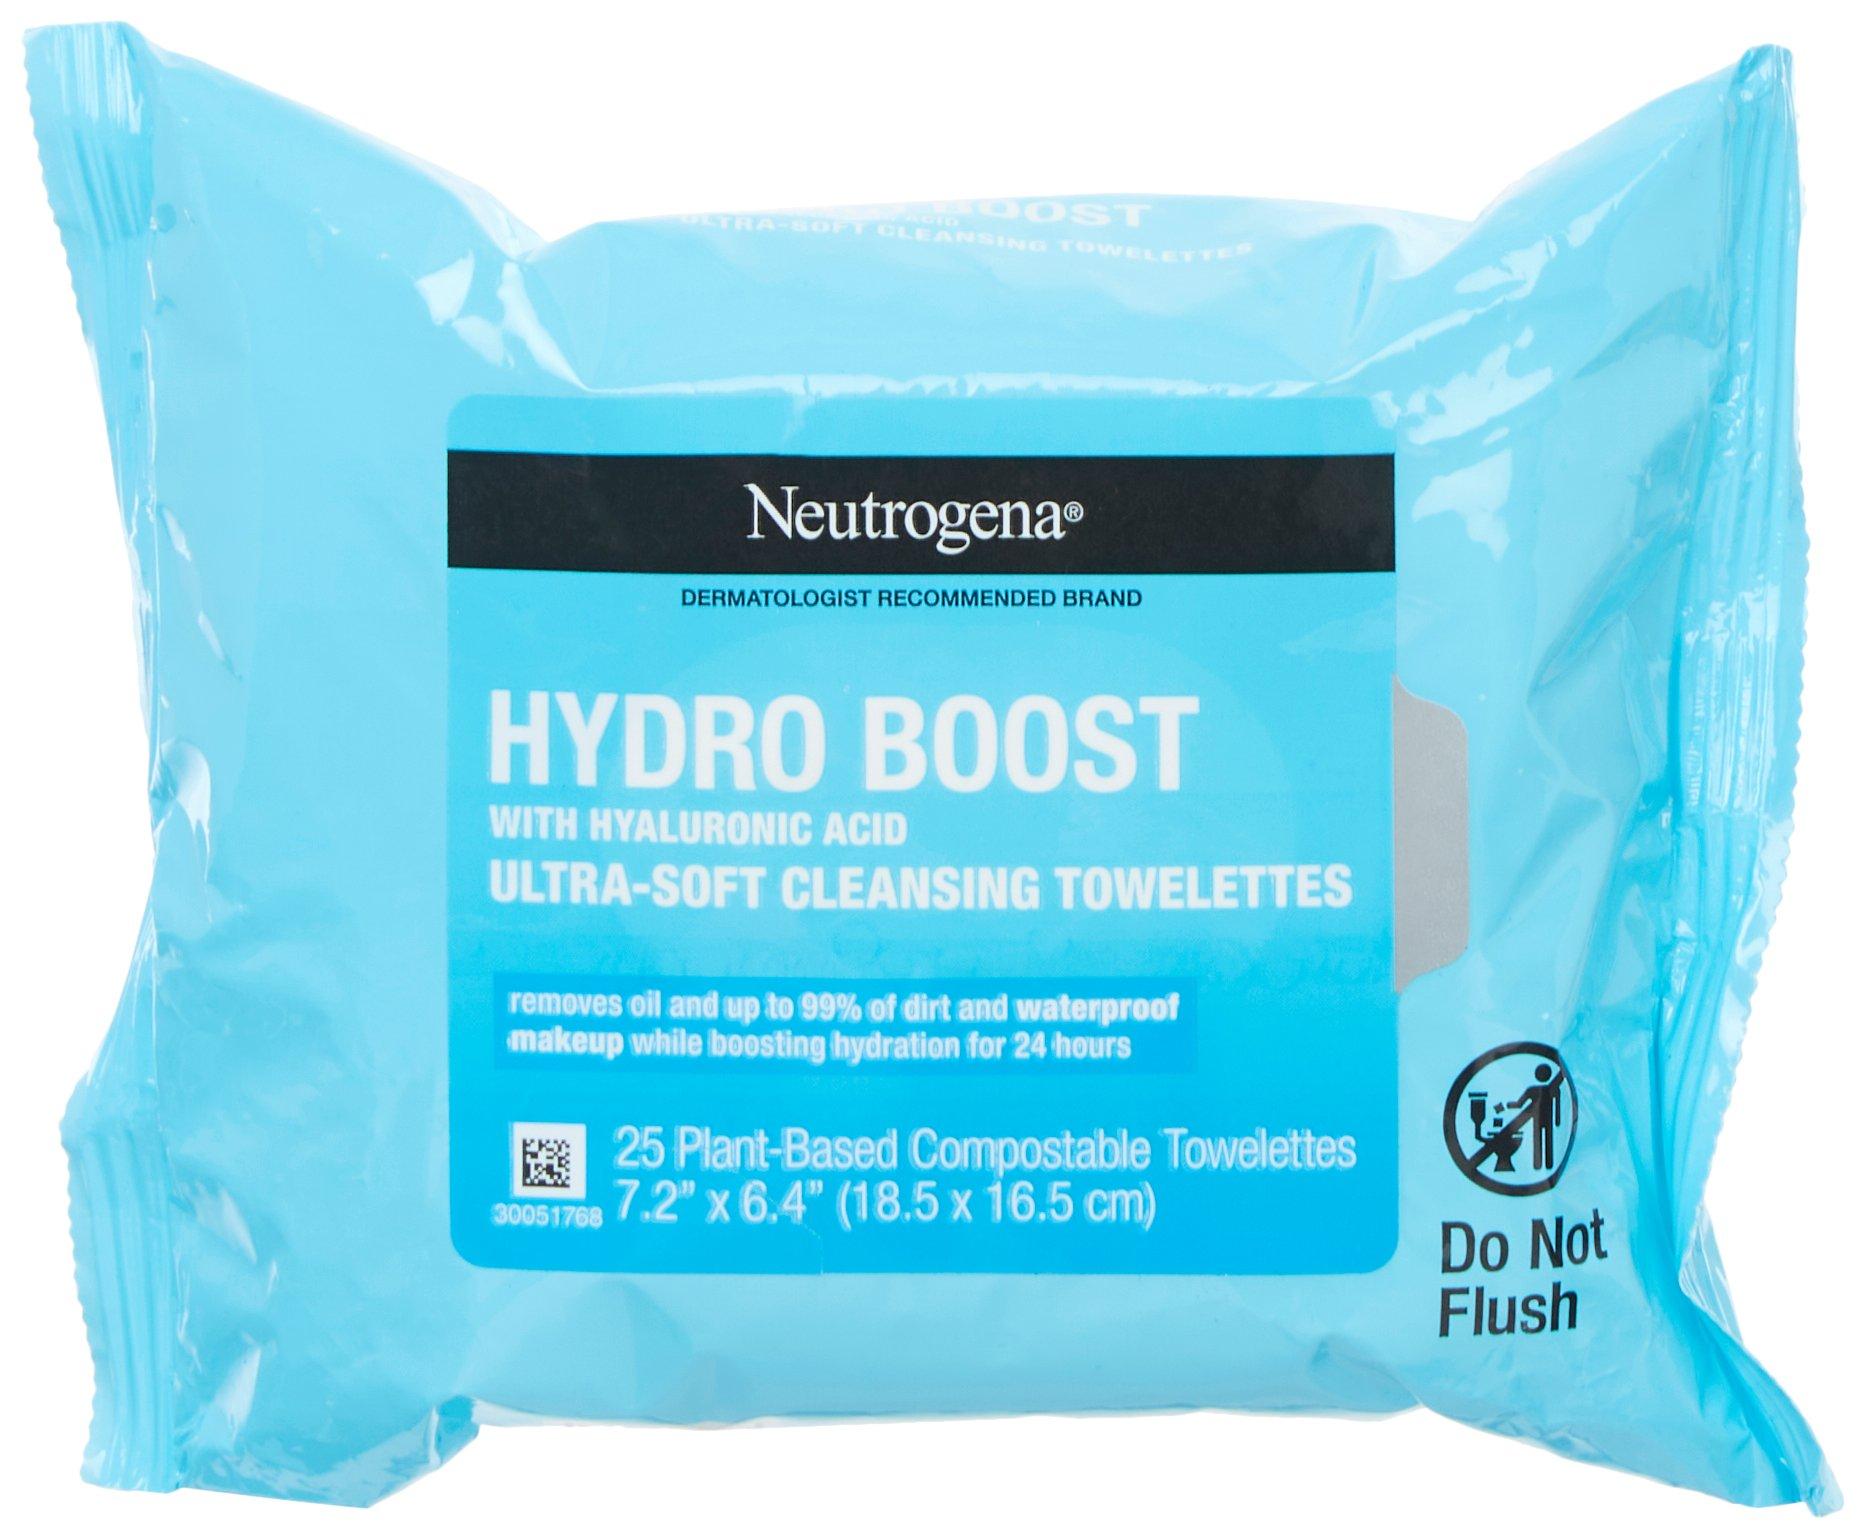 Neutrogena Hydro Boost Makeup Remover Cleansing Towelettes